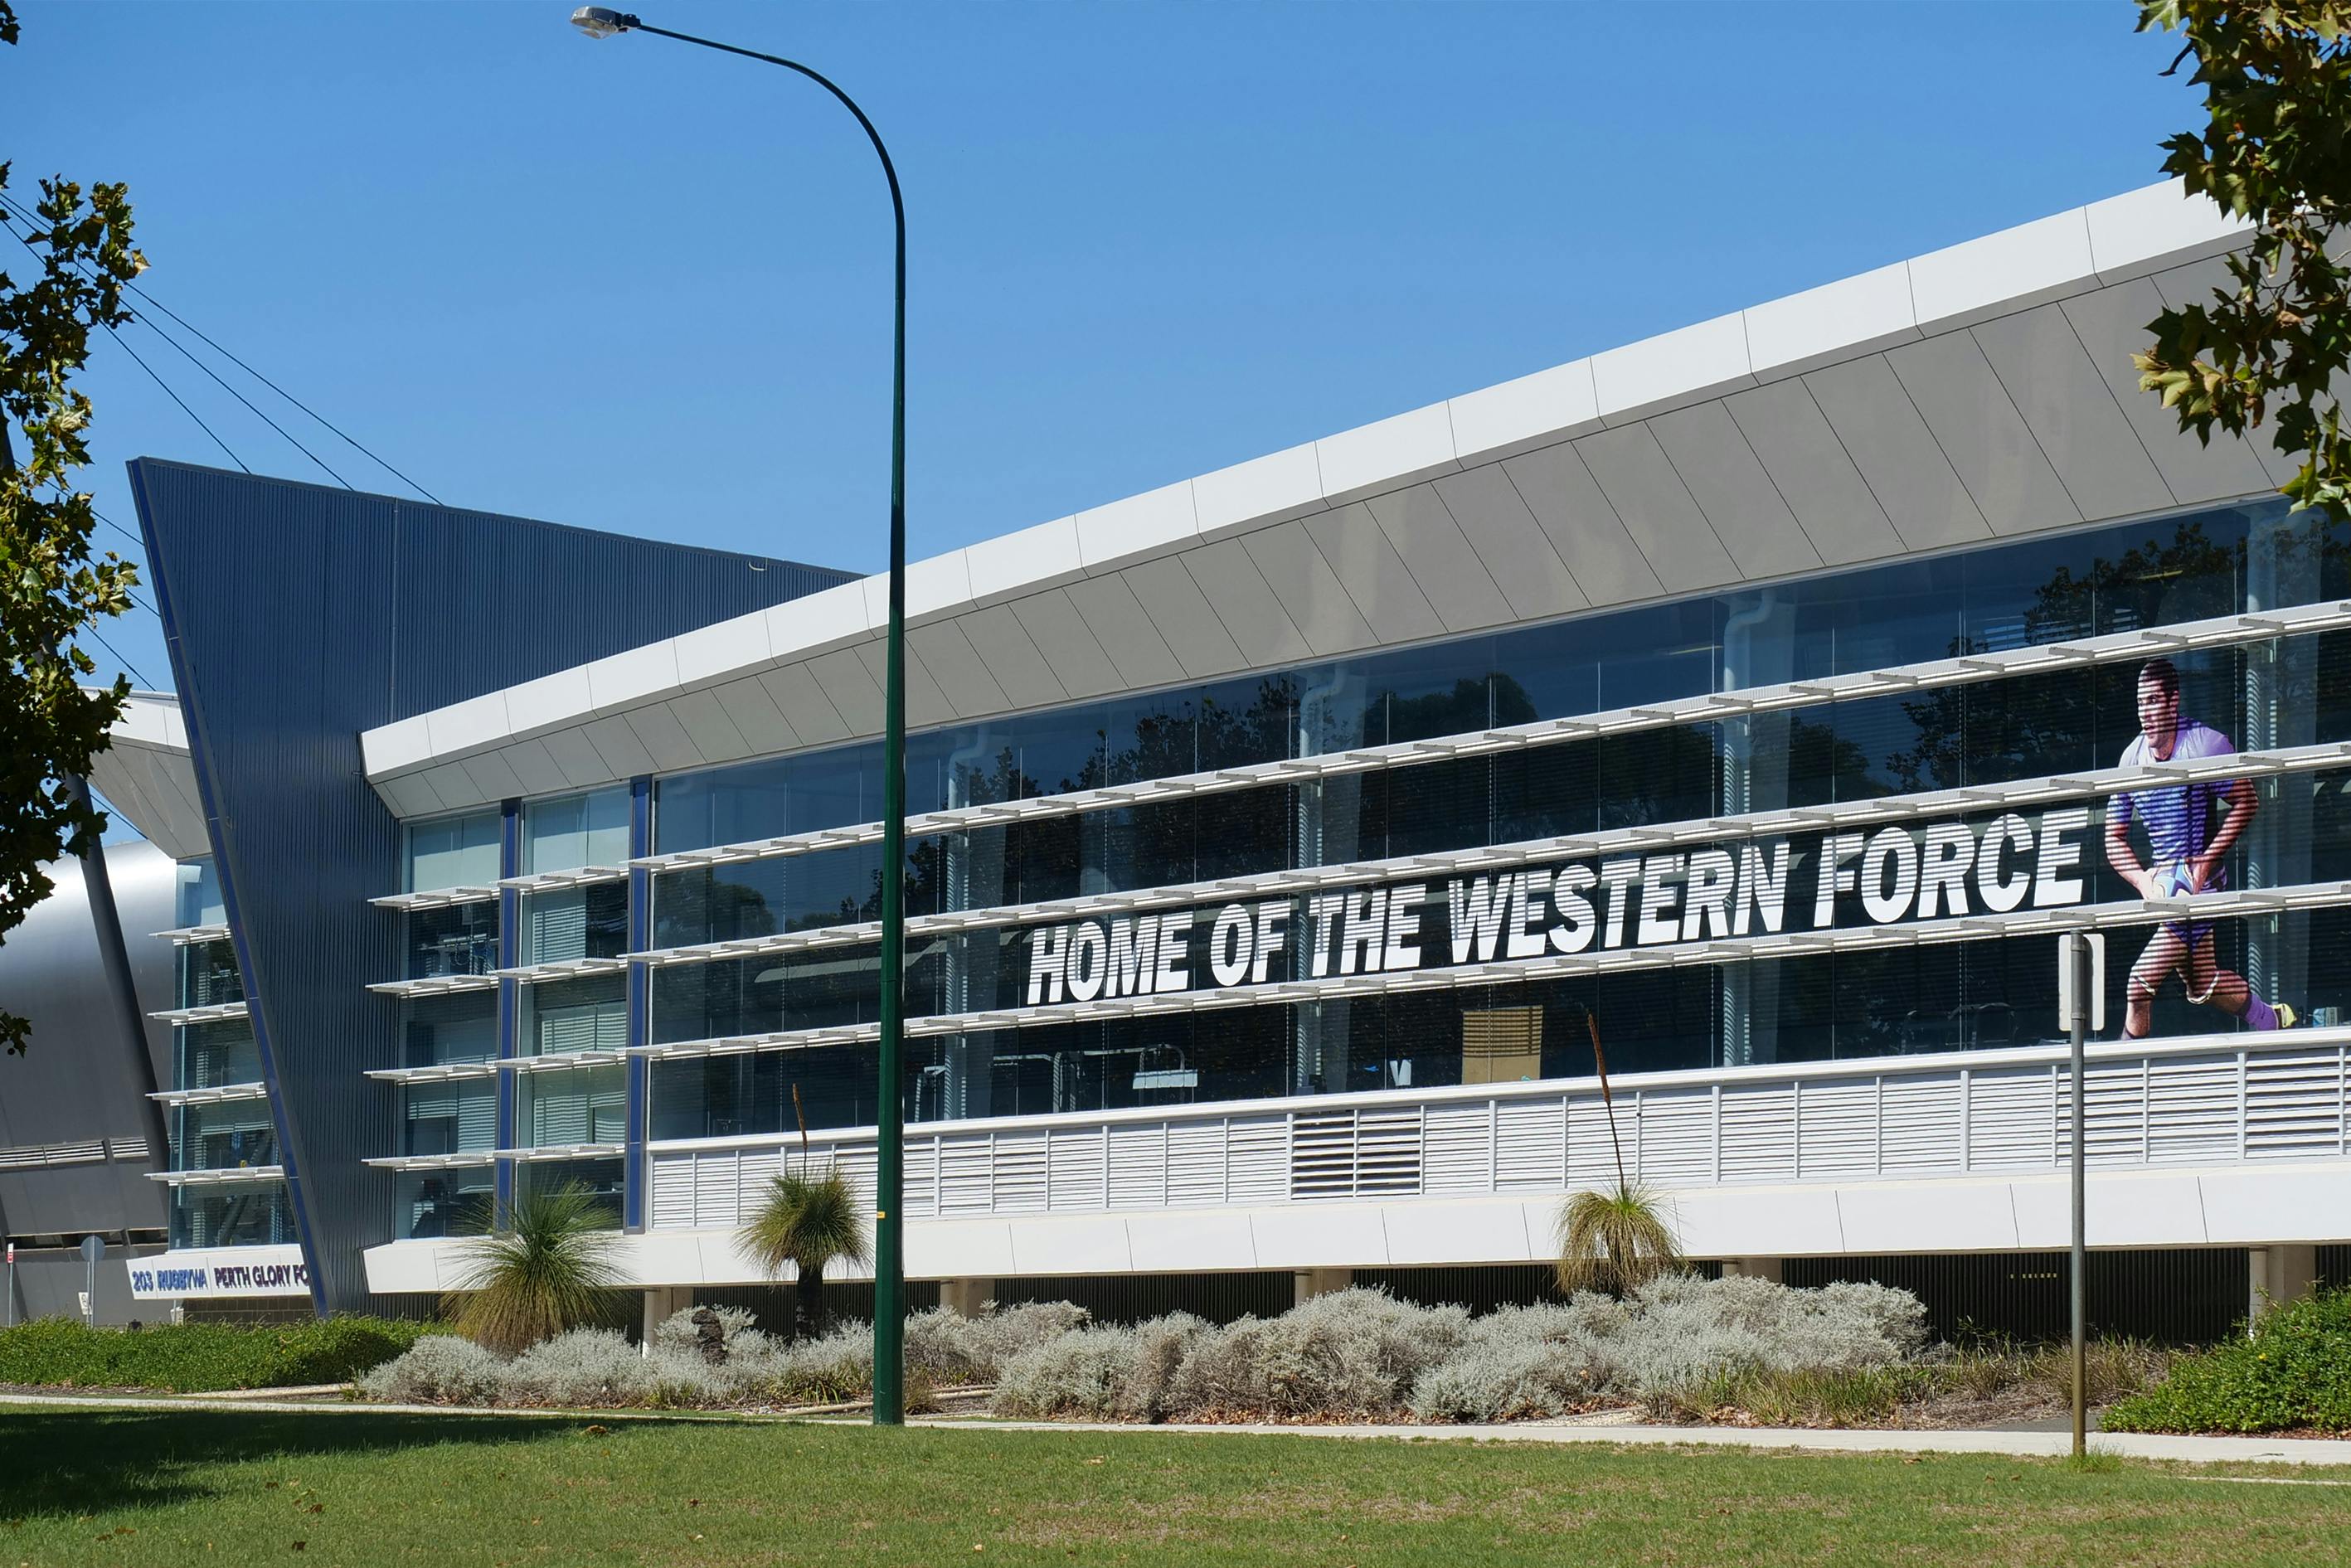 Home of Western Force